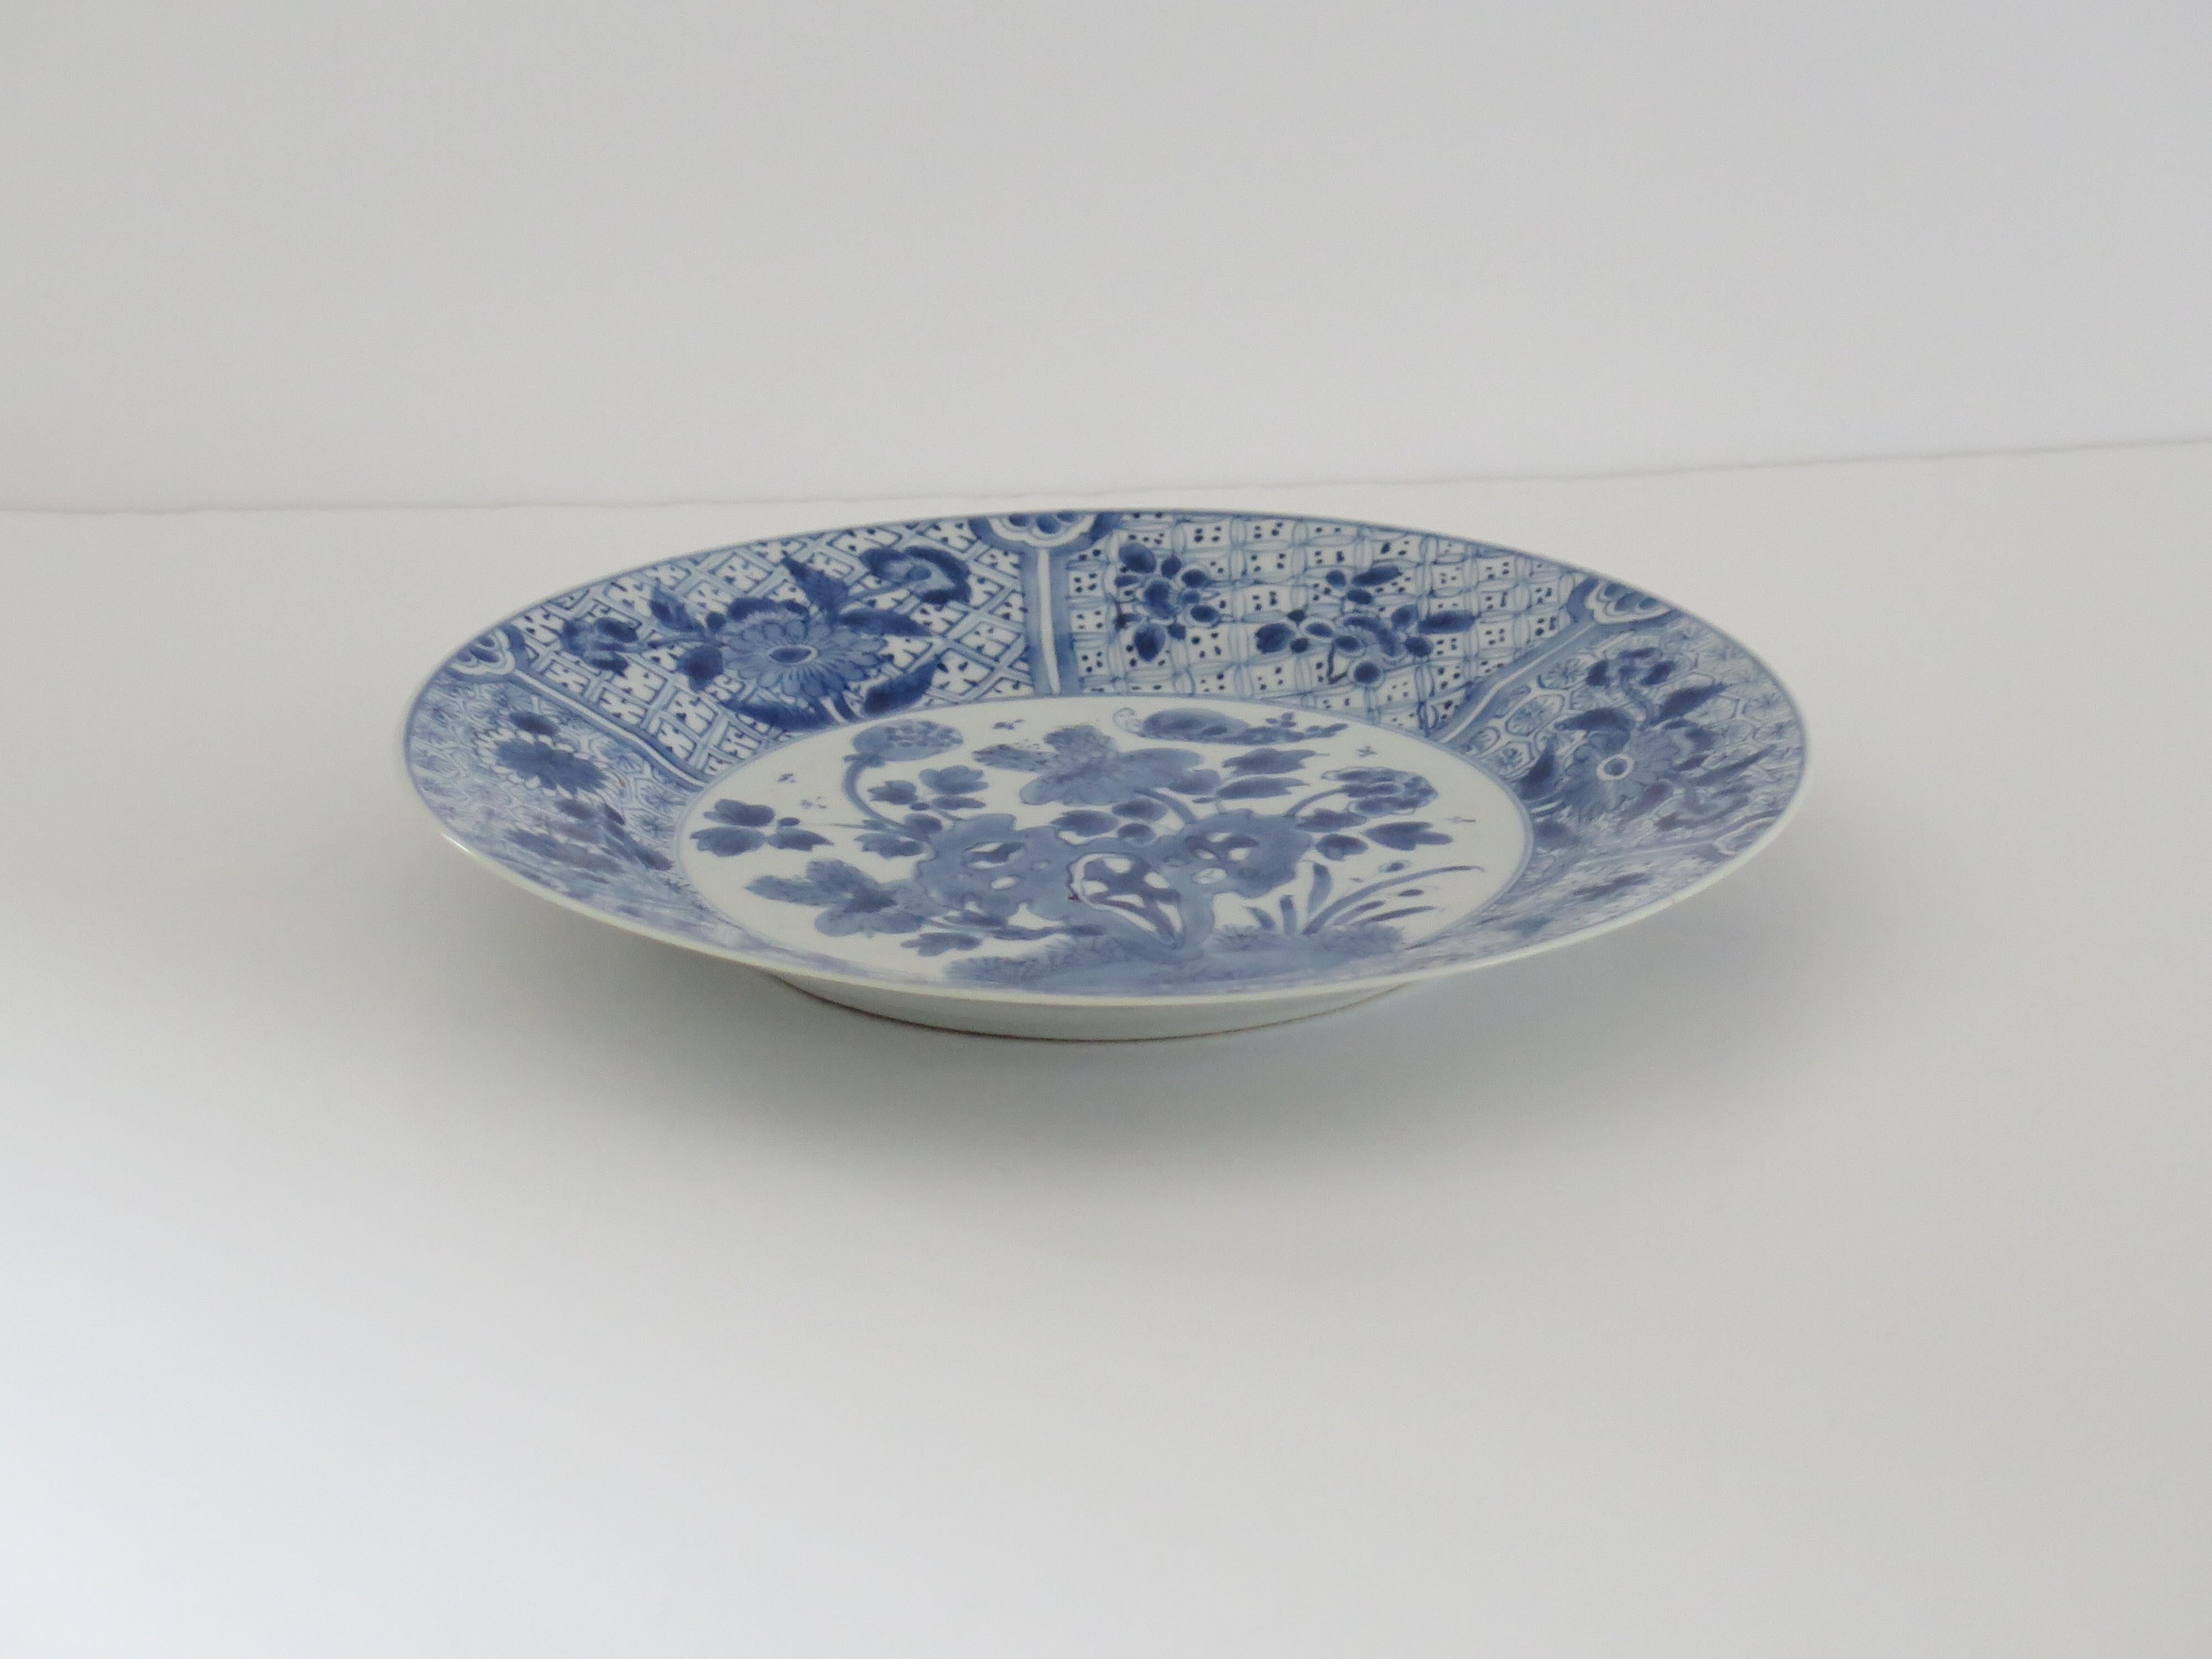 This is a very beautifully hand-painted Chinese porcelain blue and white large plate or Dish, from the Qing, Kangxi period, 1662-1722.

The plate / dish is finely potted with a carefully cut base rim and a lovely rich glassy, very light blue glaze